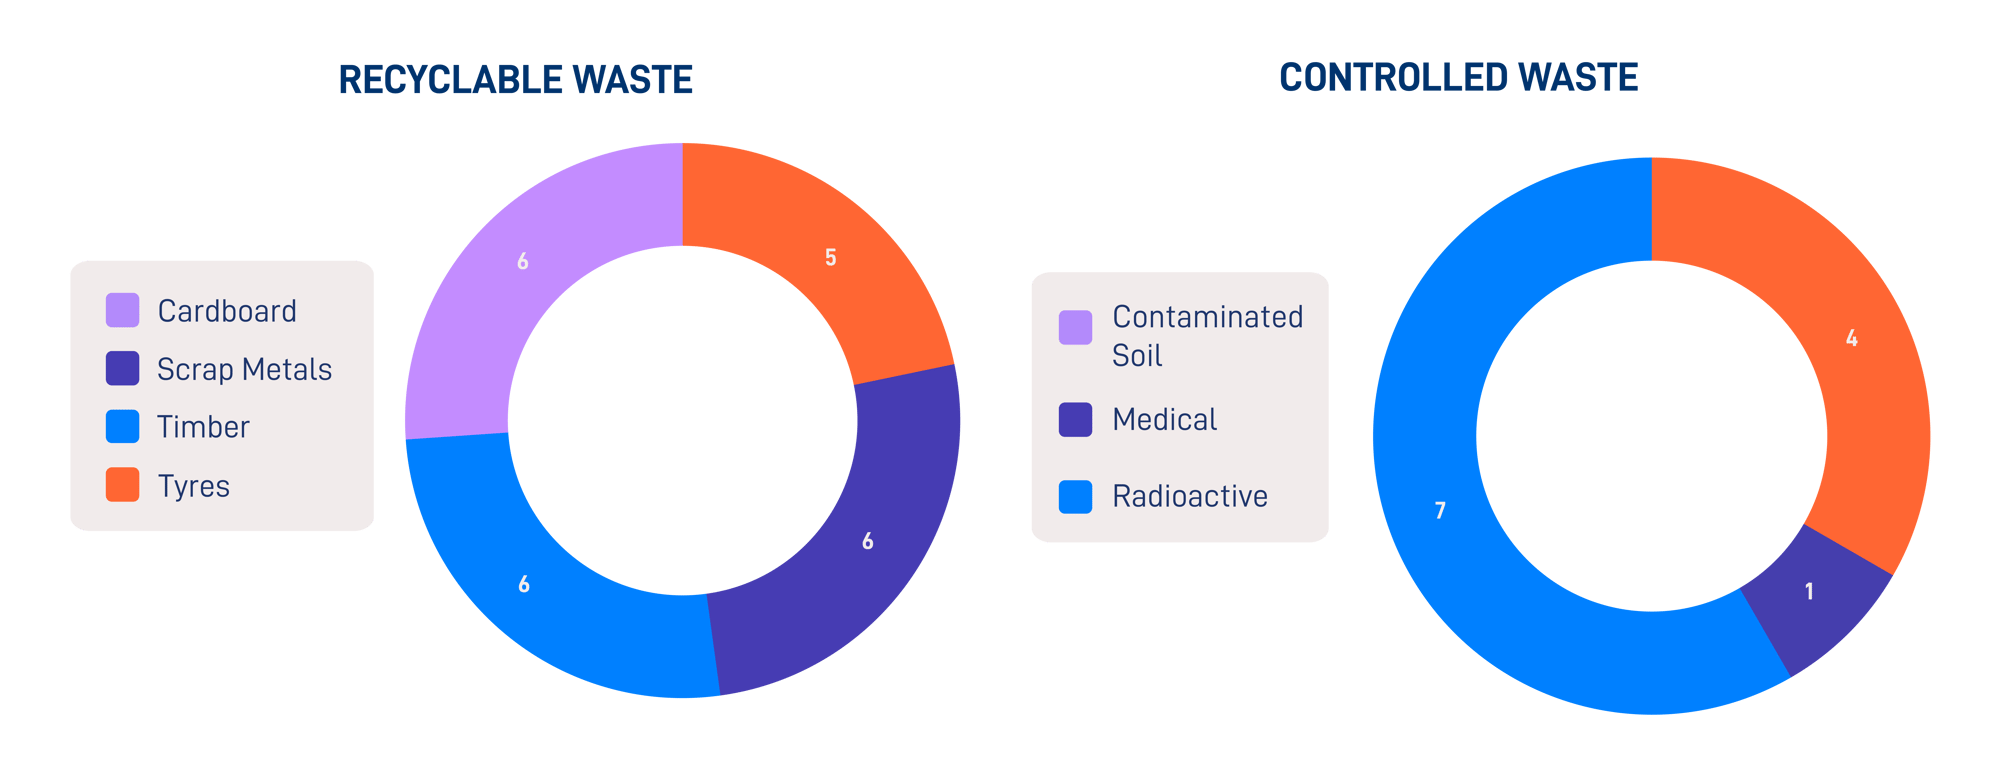 Recyclable and Controlled Waste